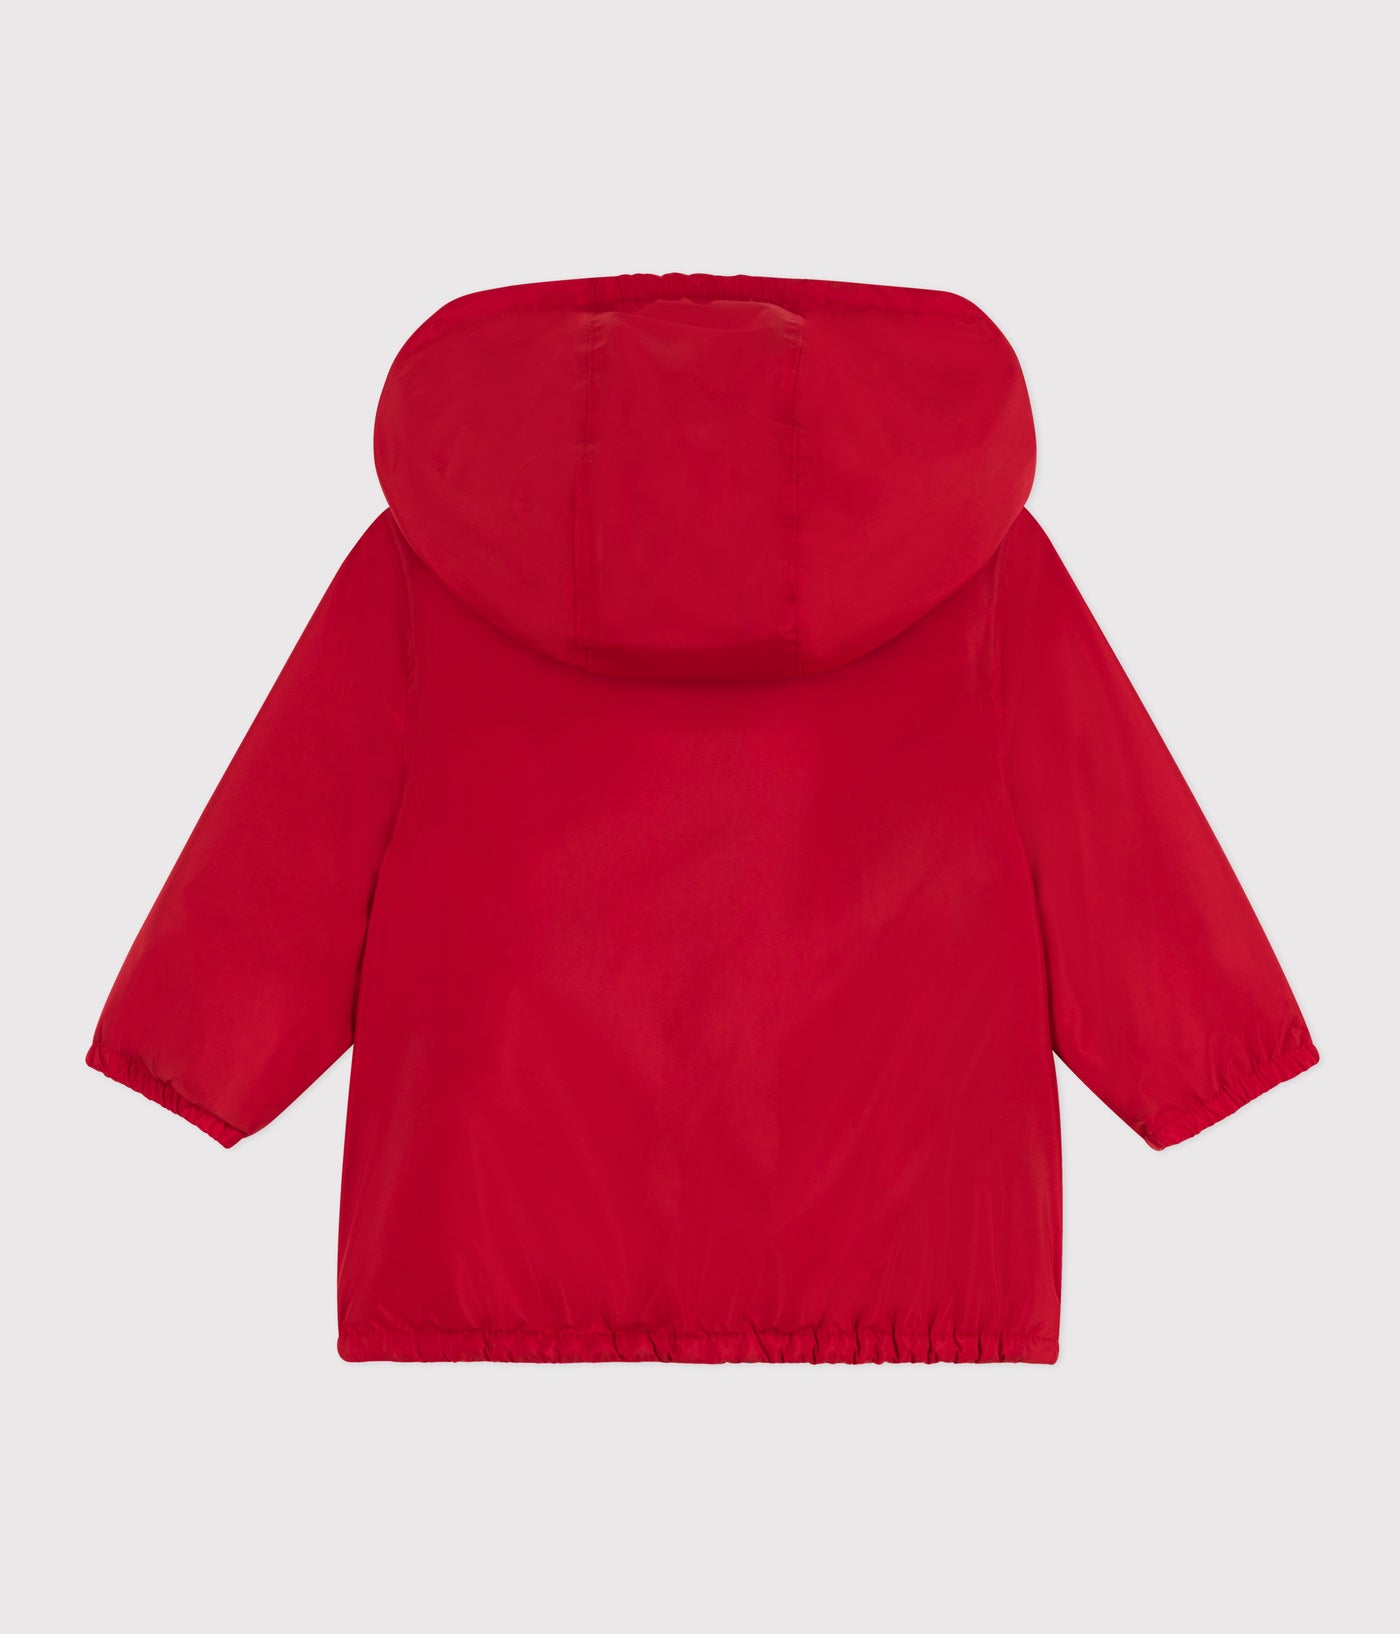 BABIES' WARM RECYCLED POLYESTER WINDBREAKER